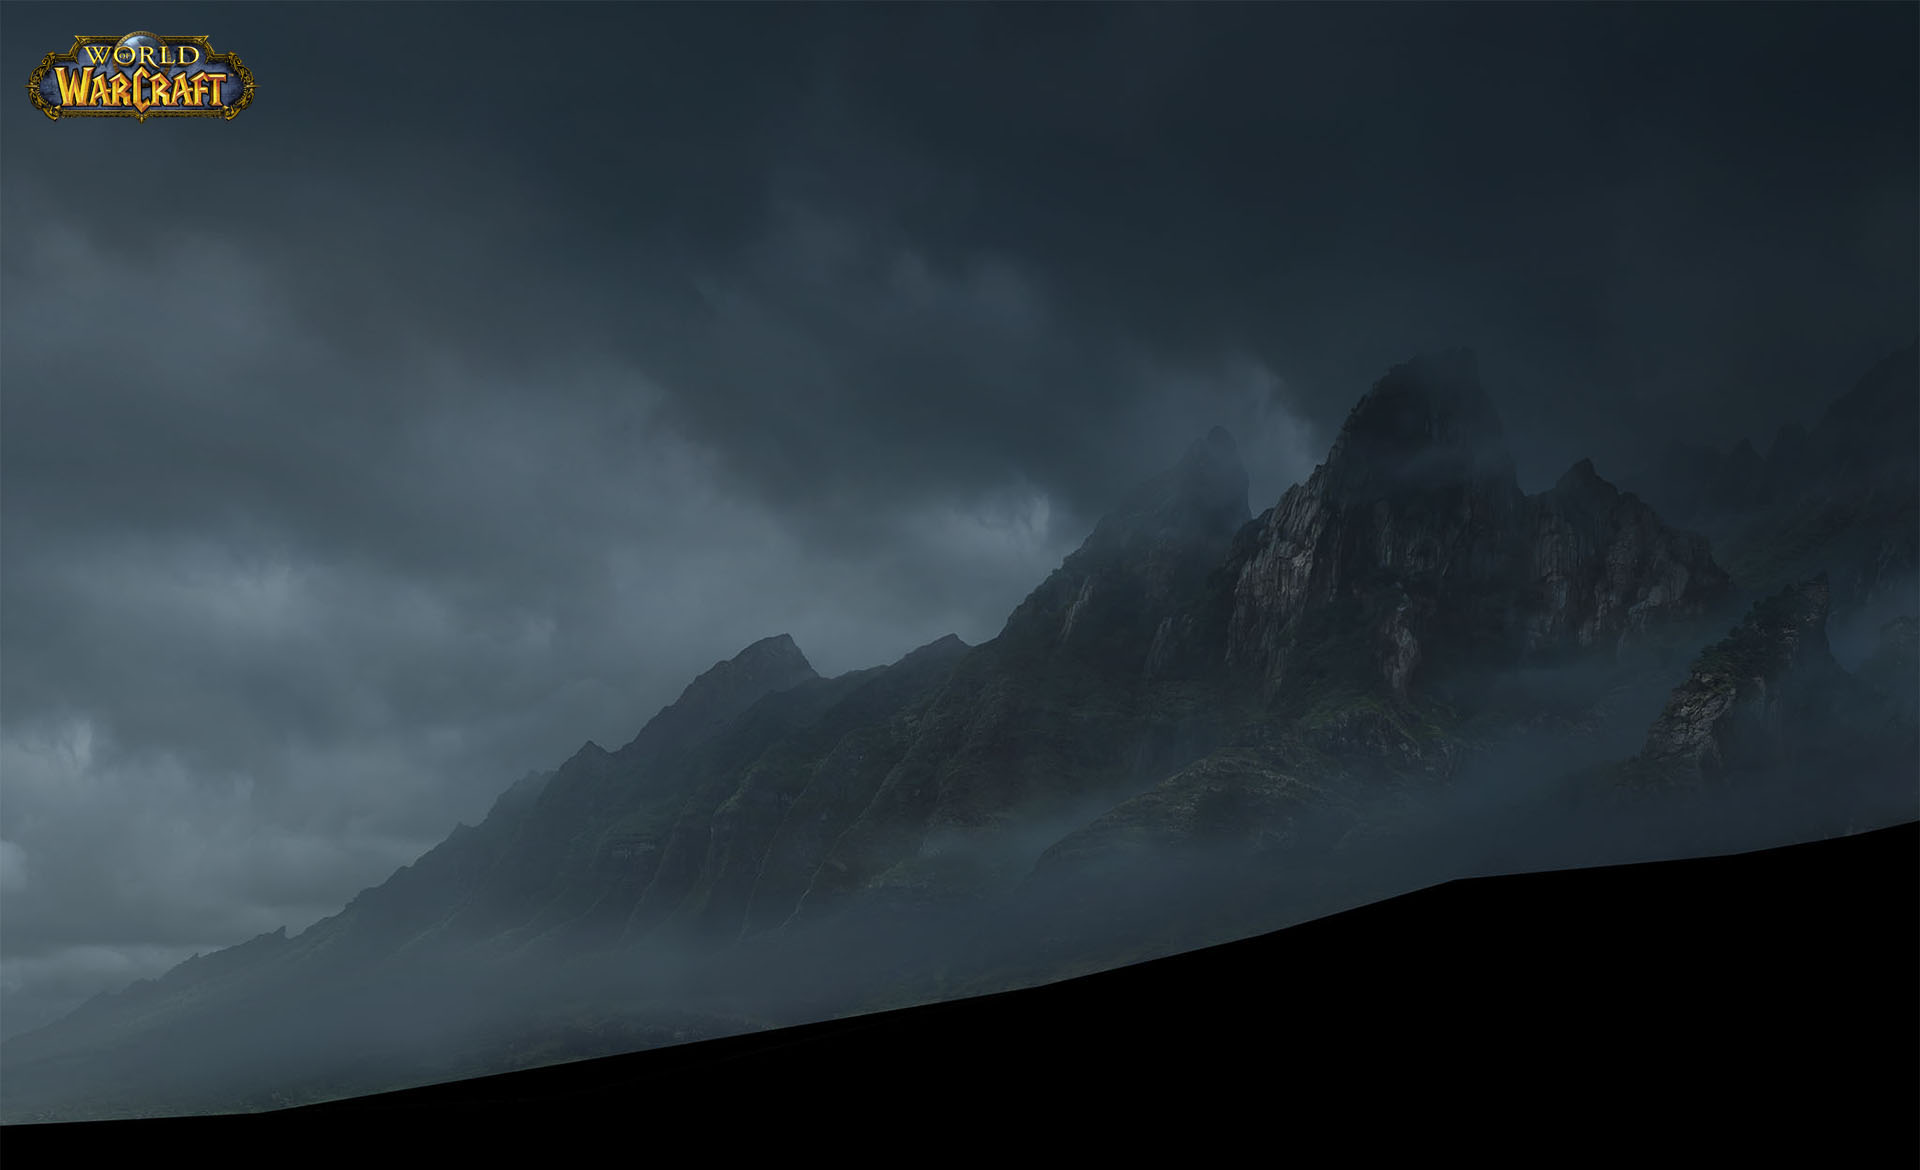 matte painting for shot where watcher walks up the steep hills of the island.